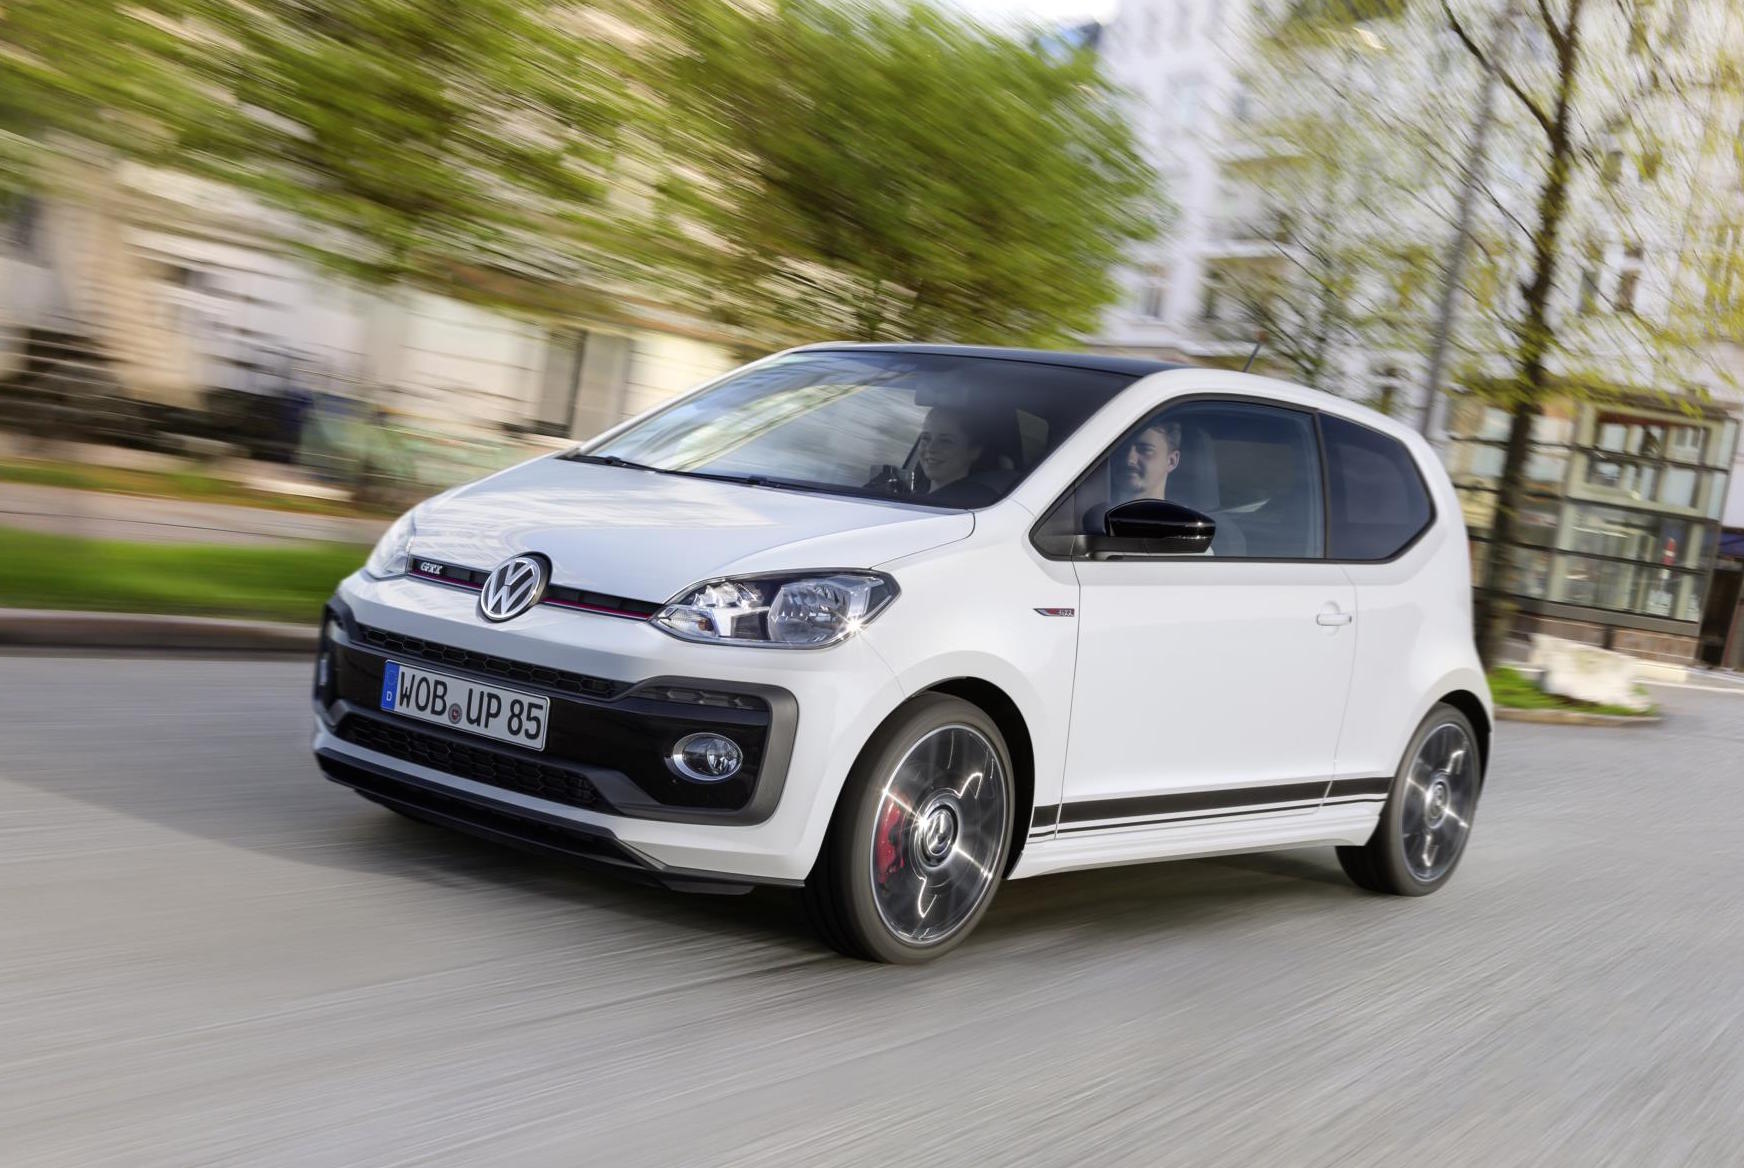 2017 Volkswagen Up! GTI officially unveiled